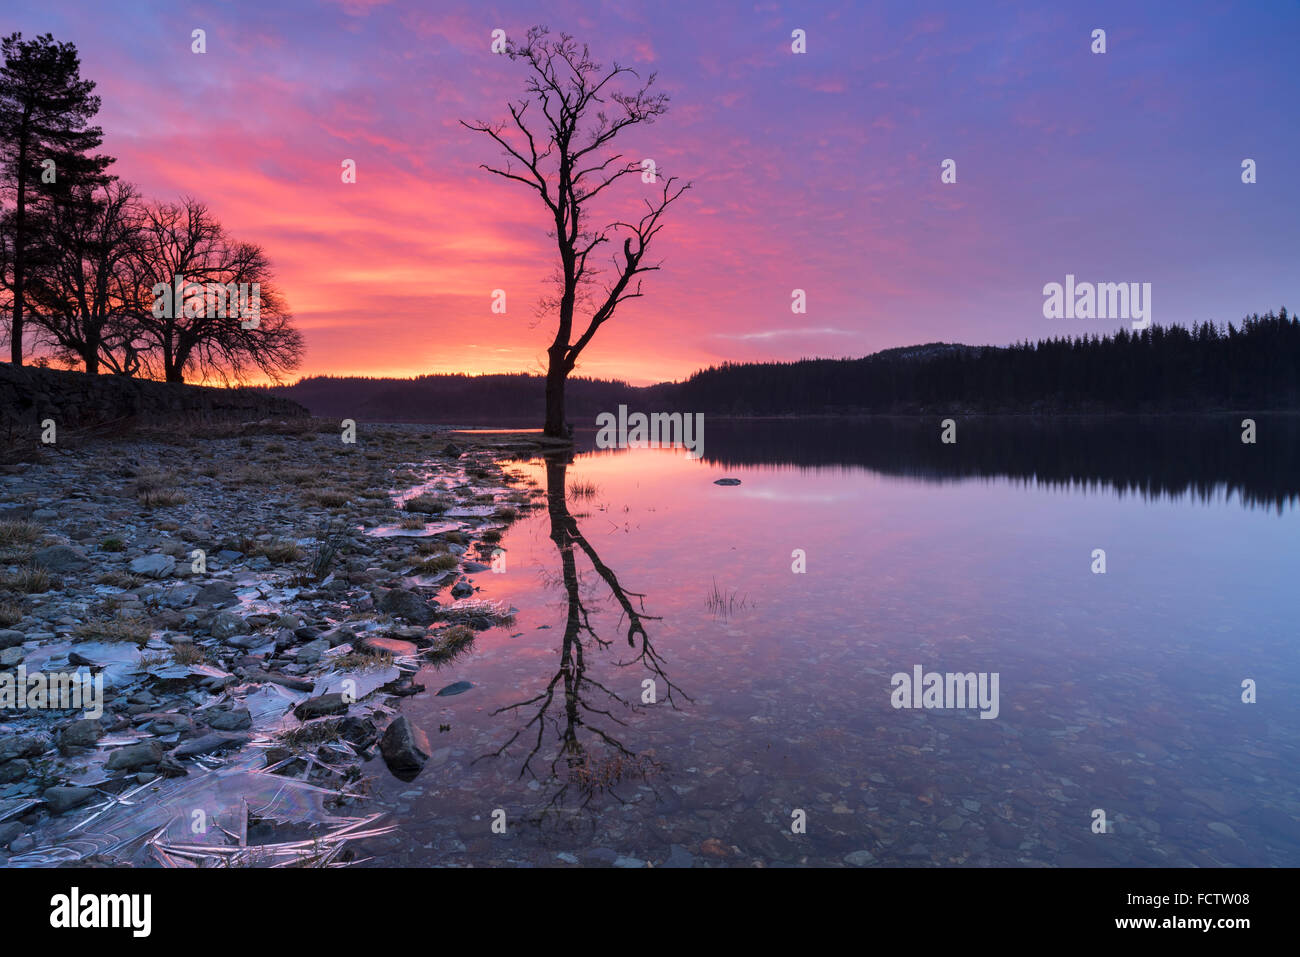 Sunrise over Loch Ard in The Lomond and Trossachs National Park, Scotland. Stock Photo